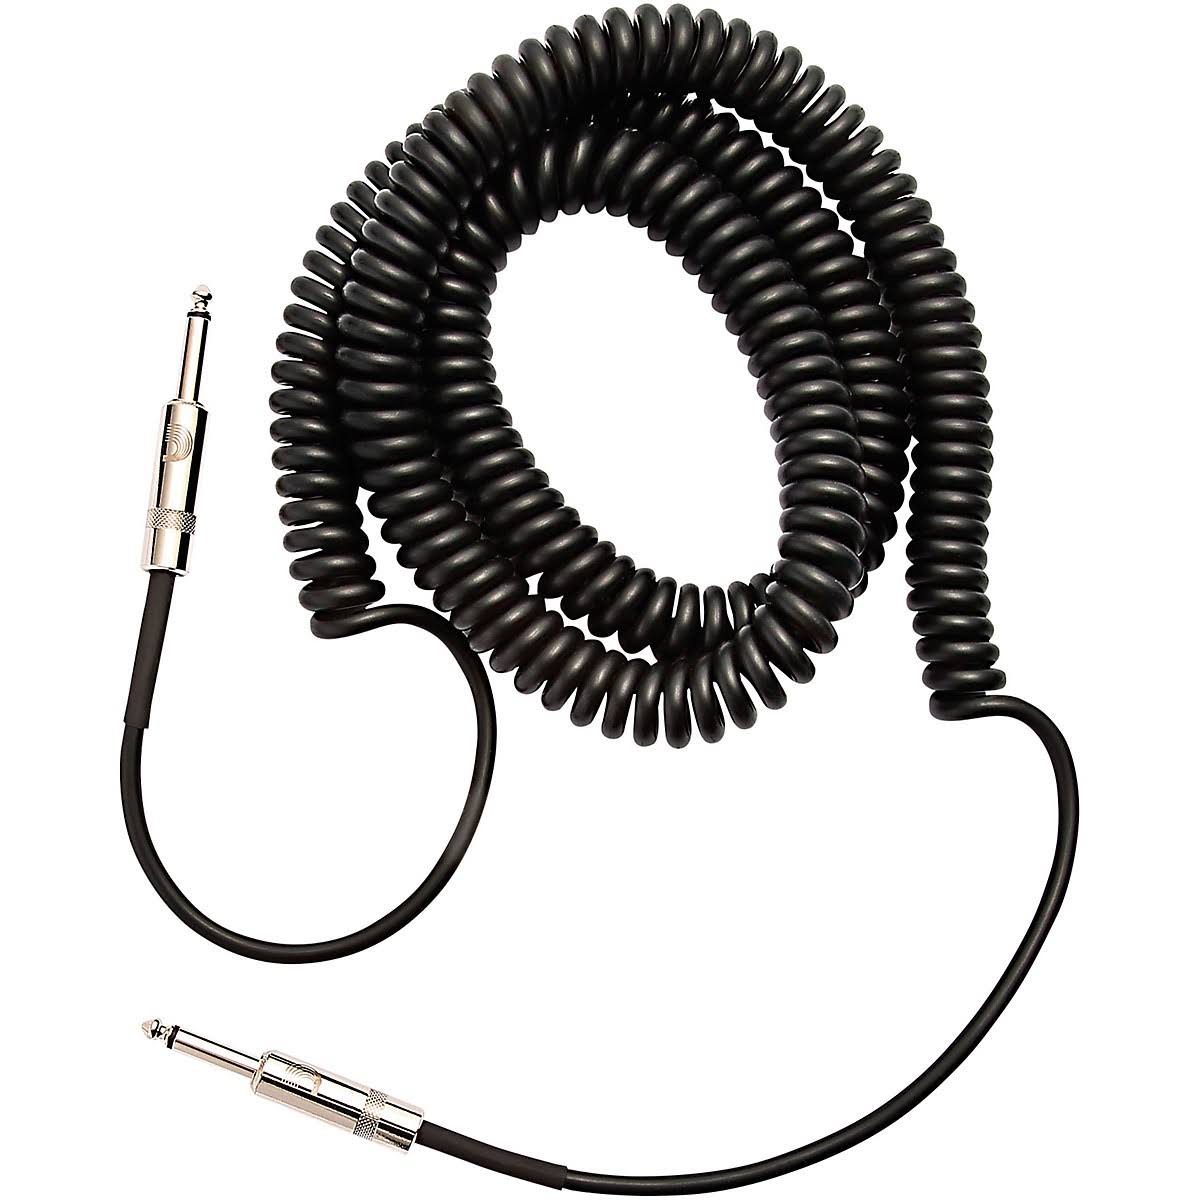 D'addario Custom Series Coiled Instrument Cable - Black, 30'